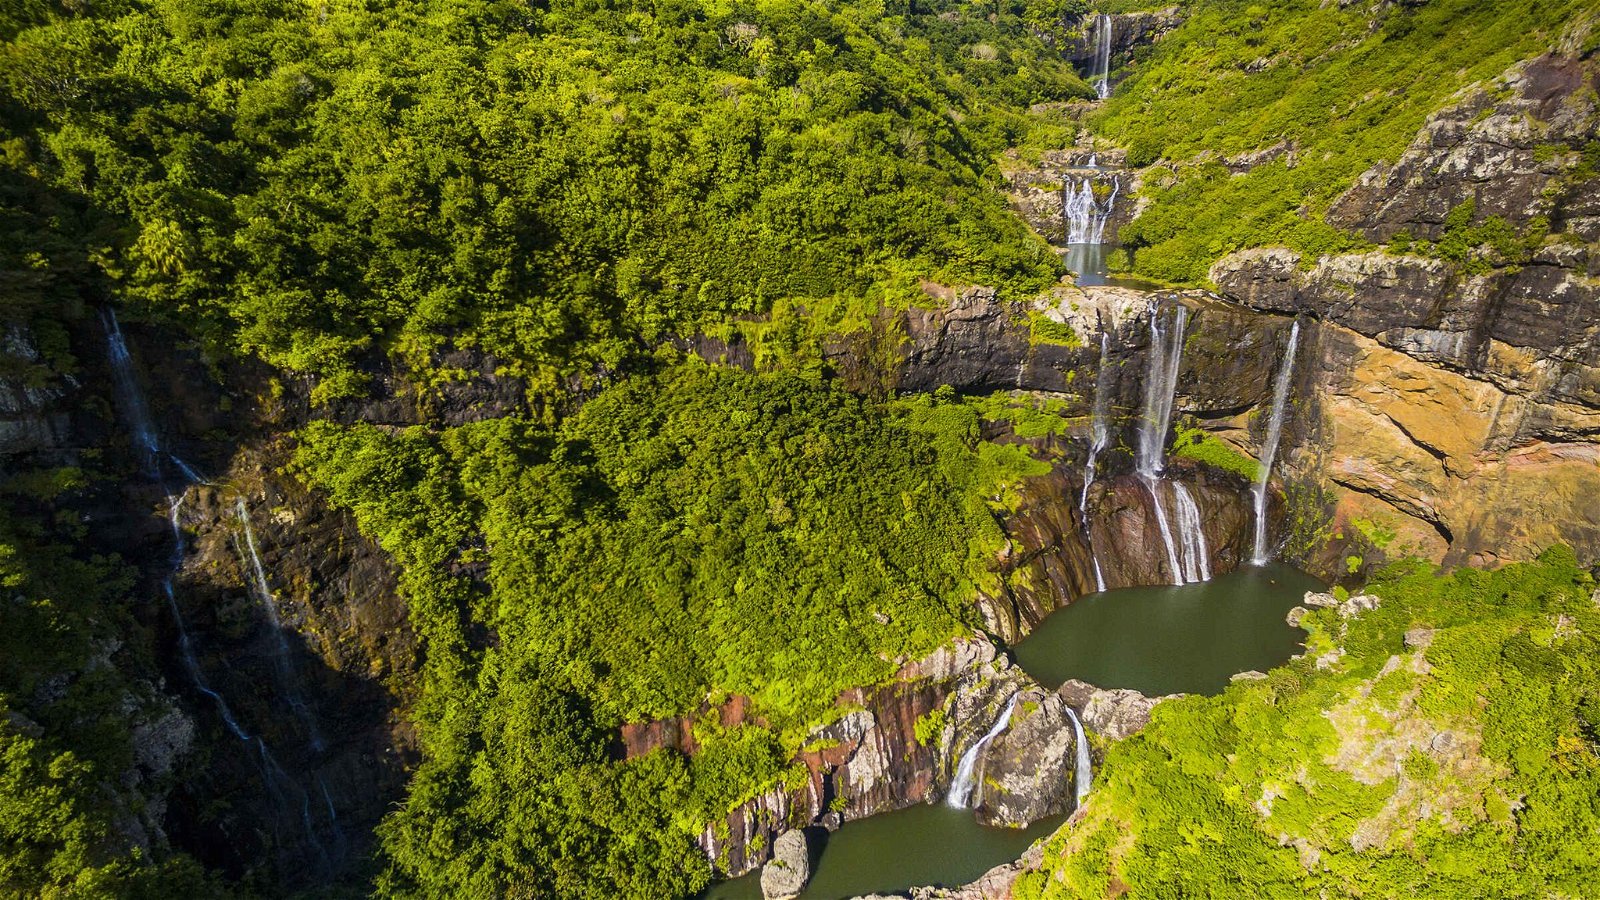 For Mauritians, Tamarind Falls holds significant cultural and historical importance.